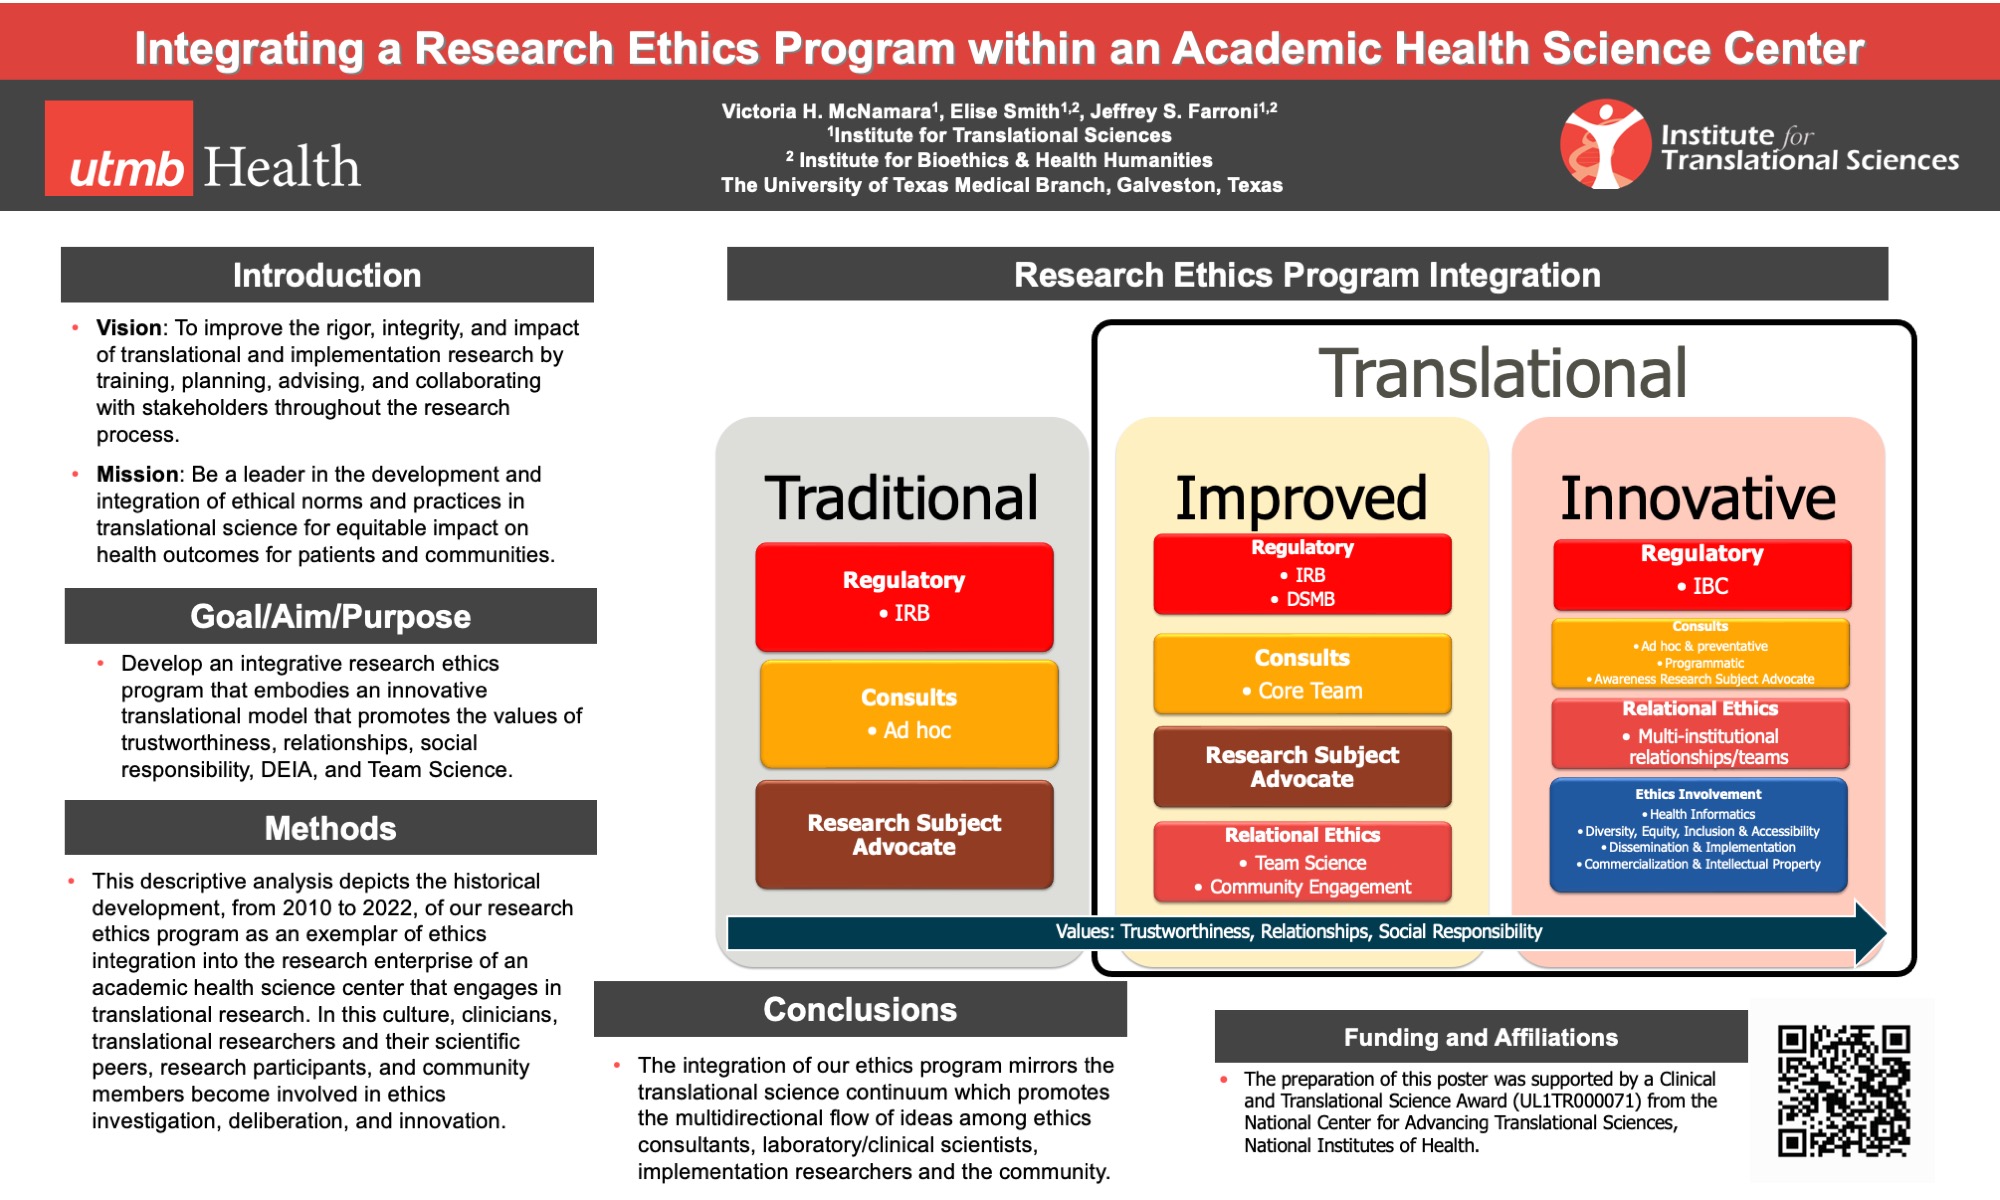 Research Poster on integrating research ethics within an academic health science center